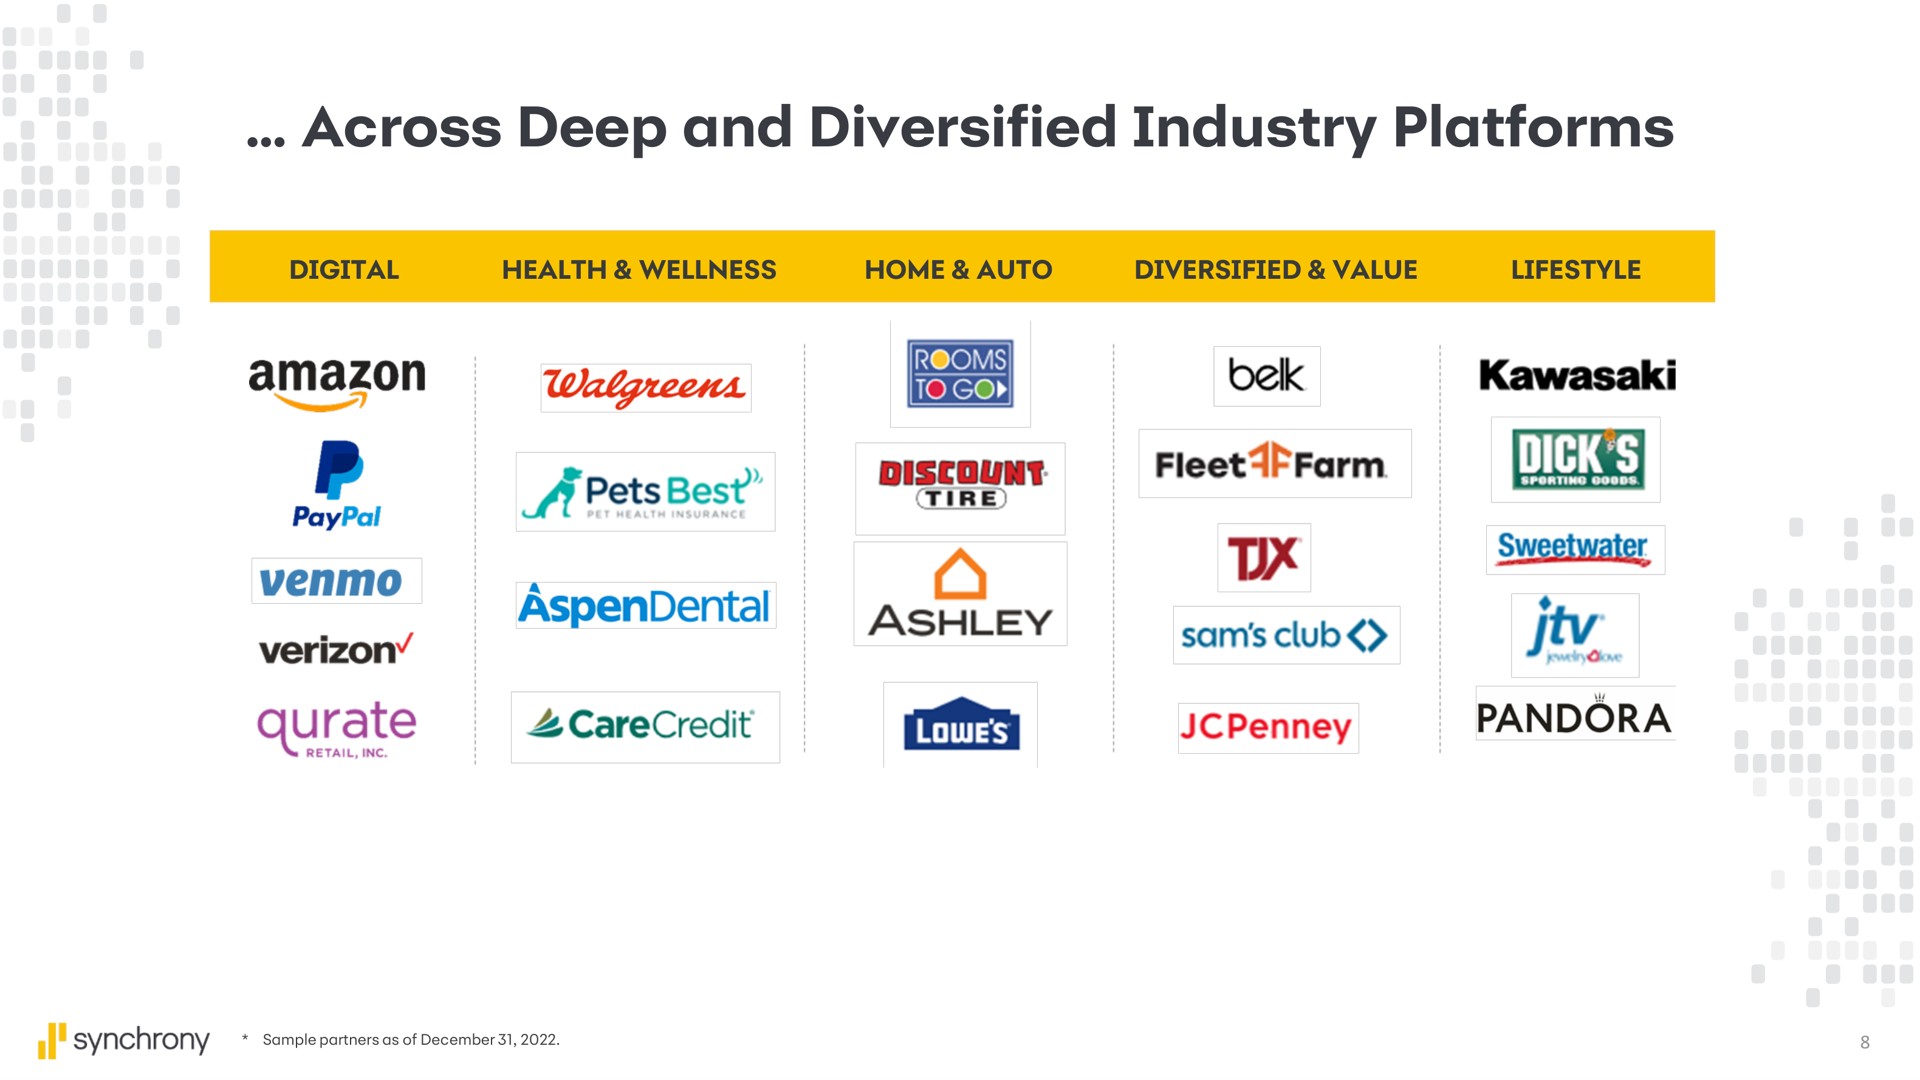 across deep and diversified industry platforms rate discount fleet farm pandora | Synchrony Financial